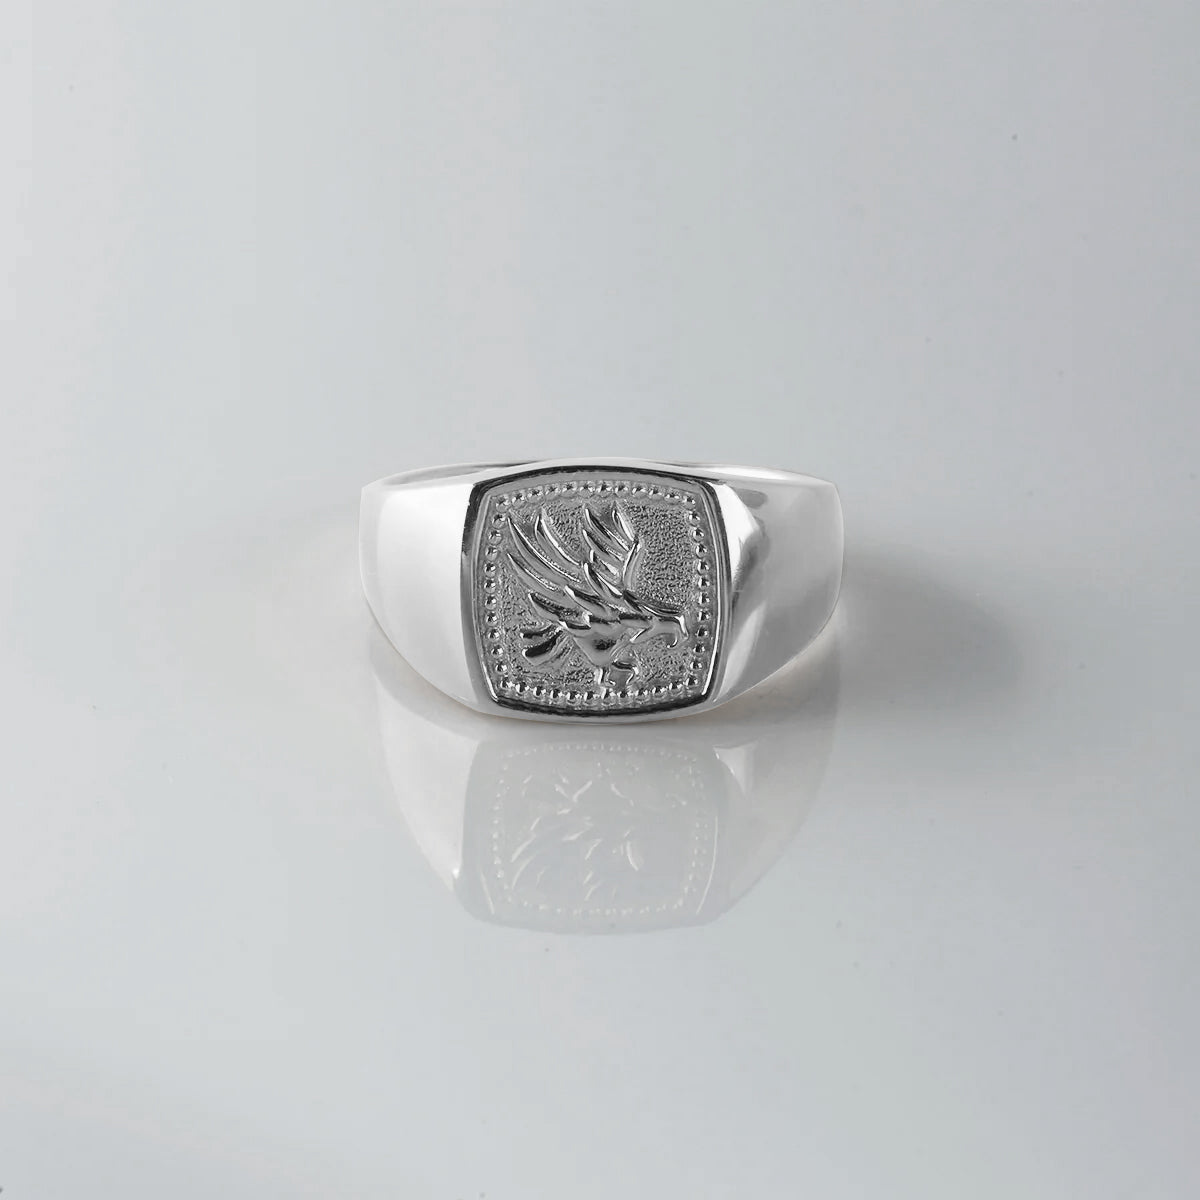 Eagle signet Ring SILVER